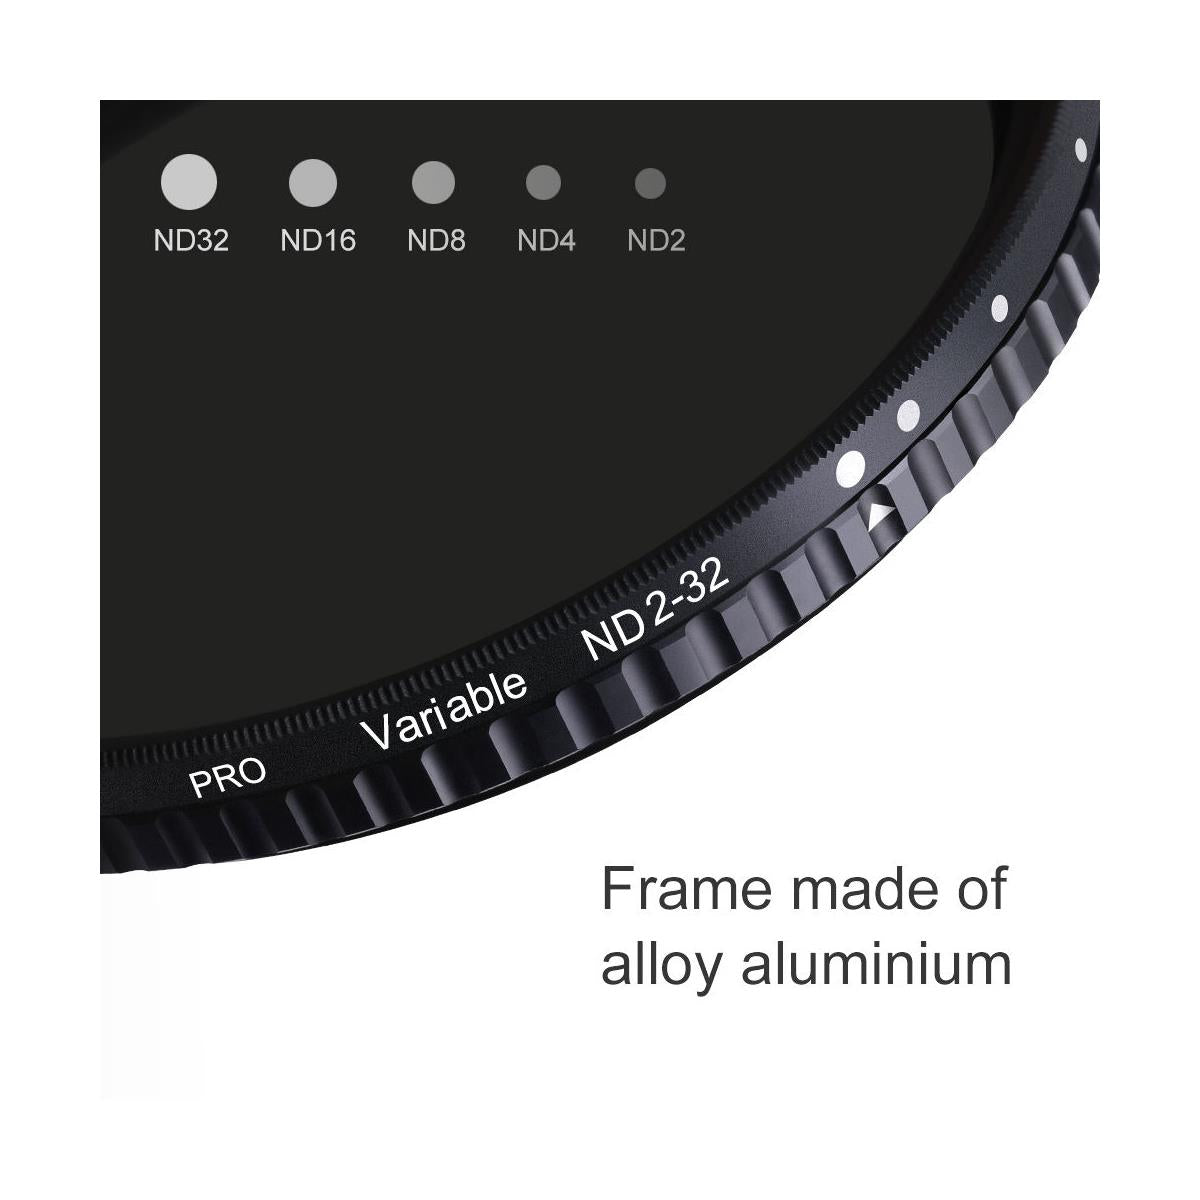 K&F Concept KF01-1370 37MM Nano-X Variable Fader ND ND2 Waterproof Anti-Scratch Optic Lens Filter